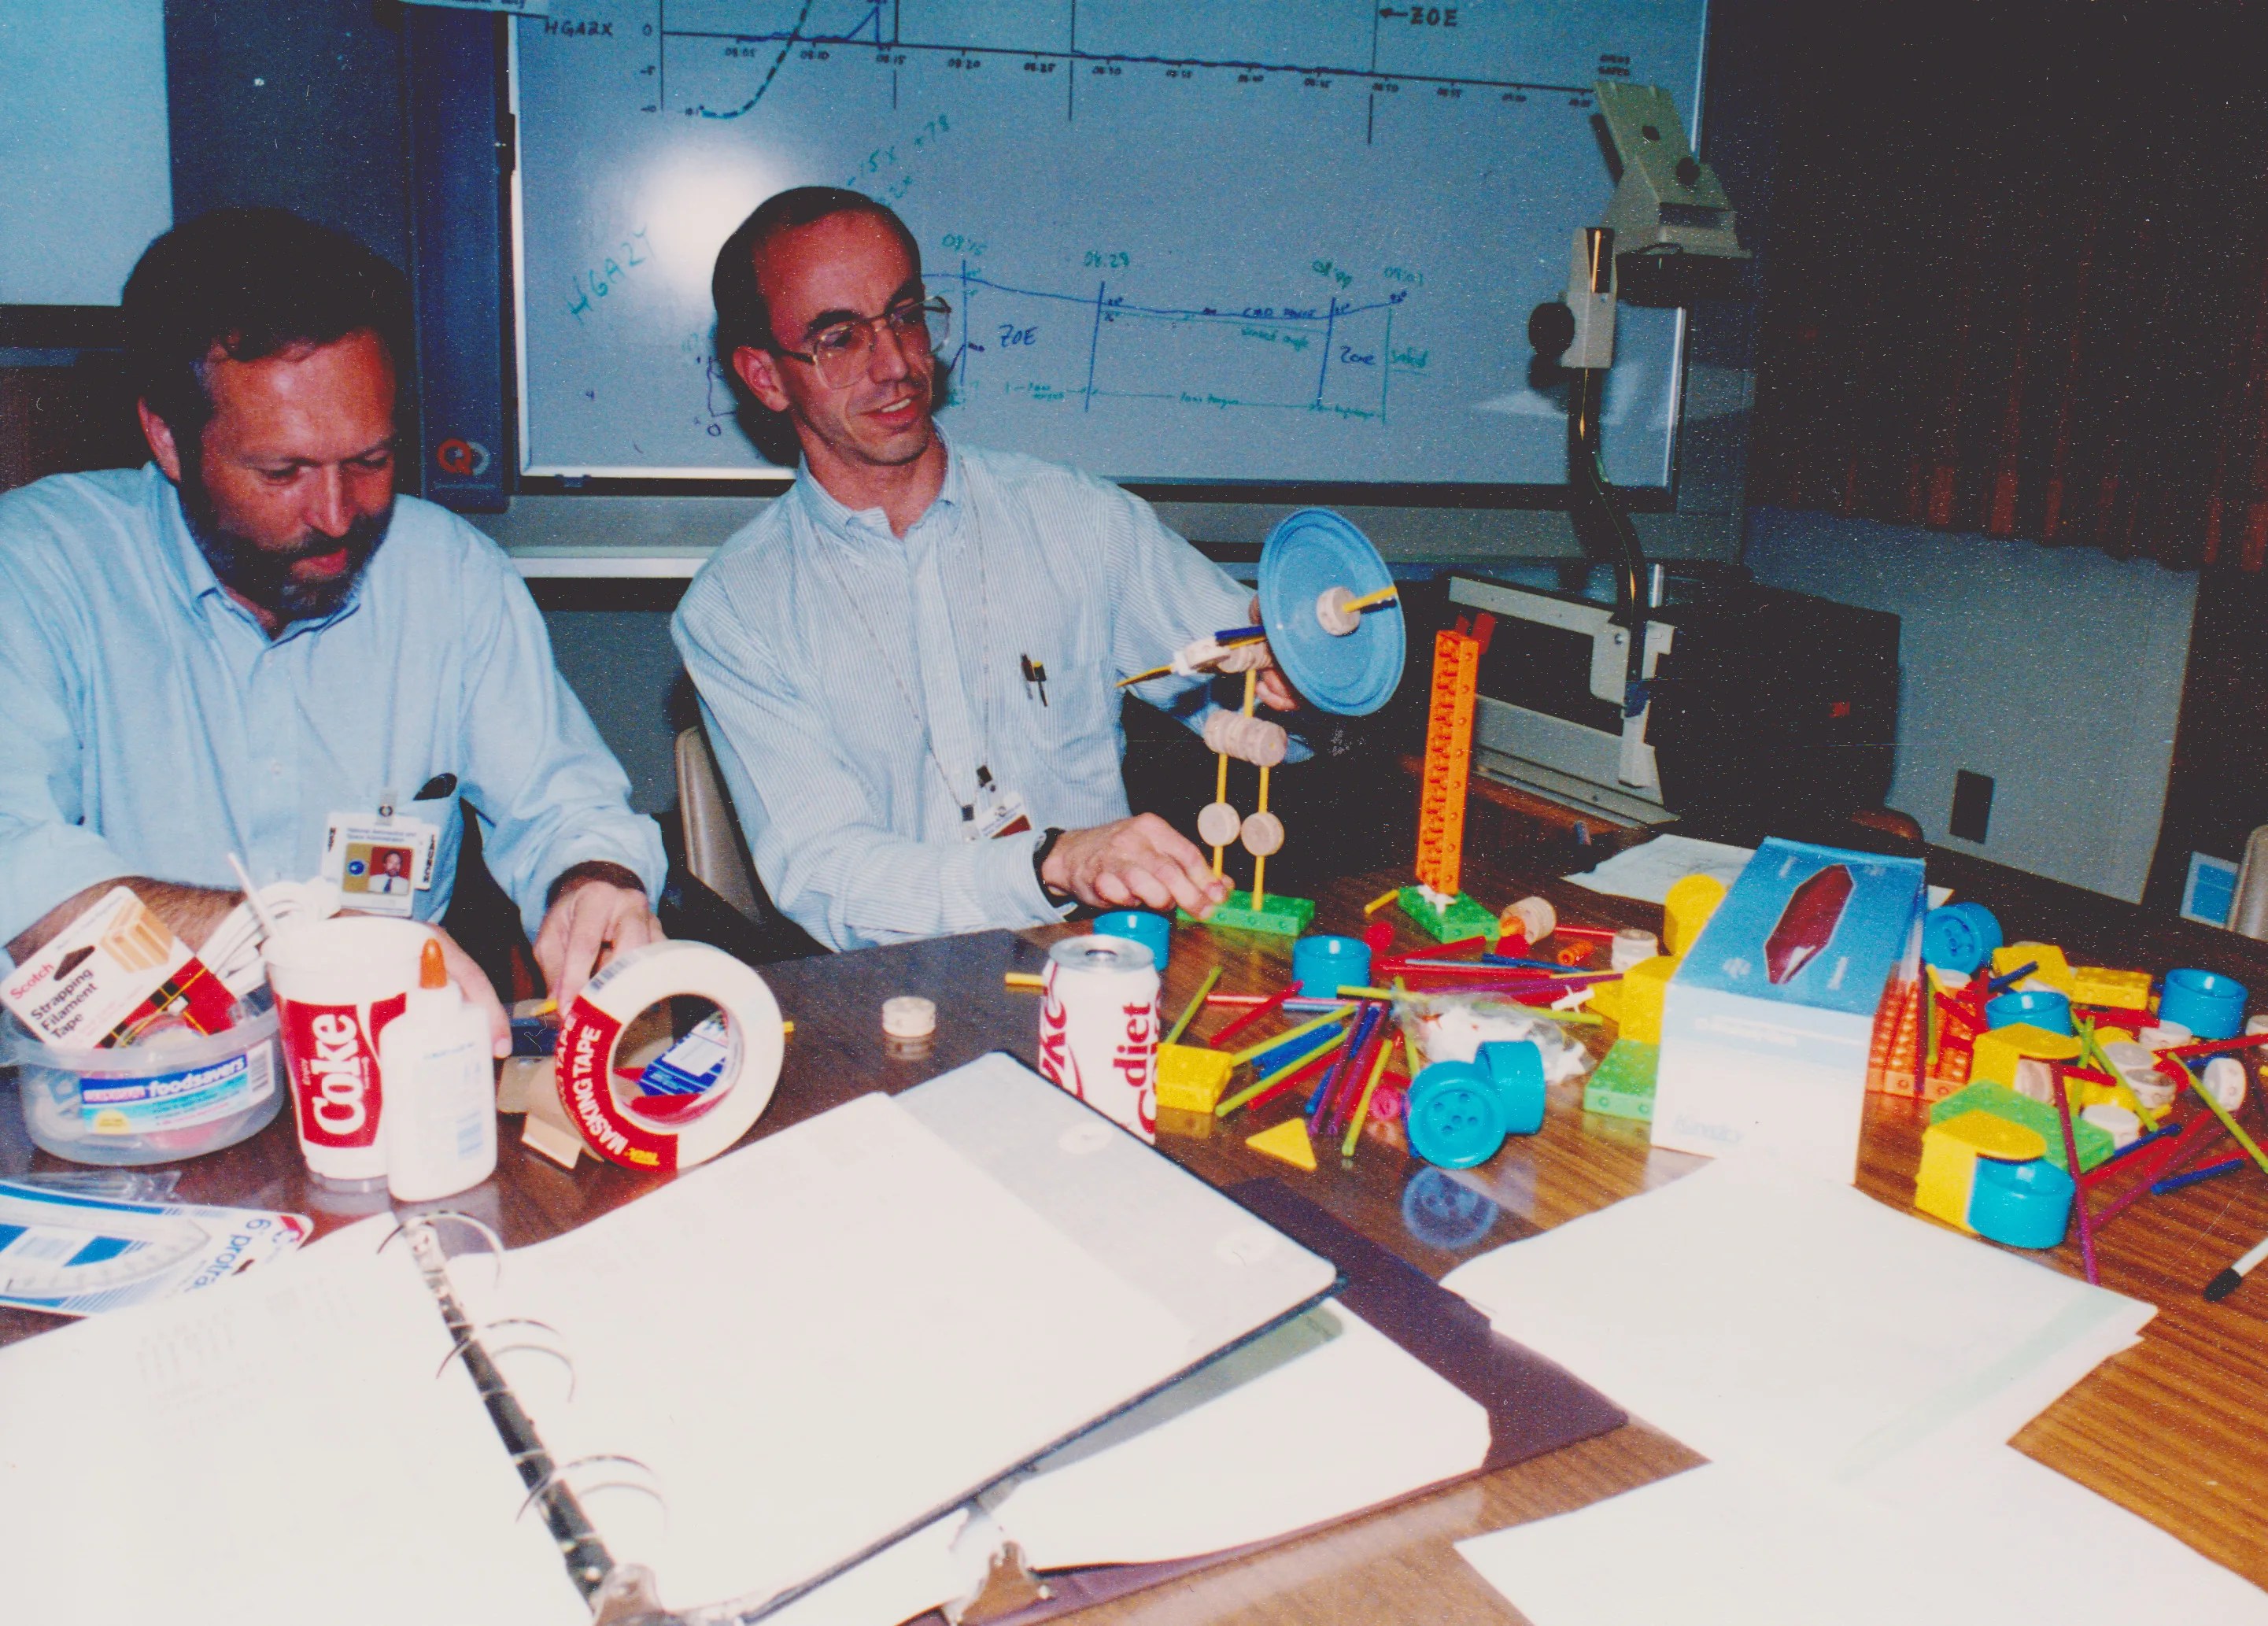 Engineers build a Tinkertoy model of the Hubble Space Telescope in 1990